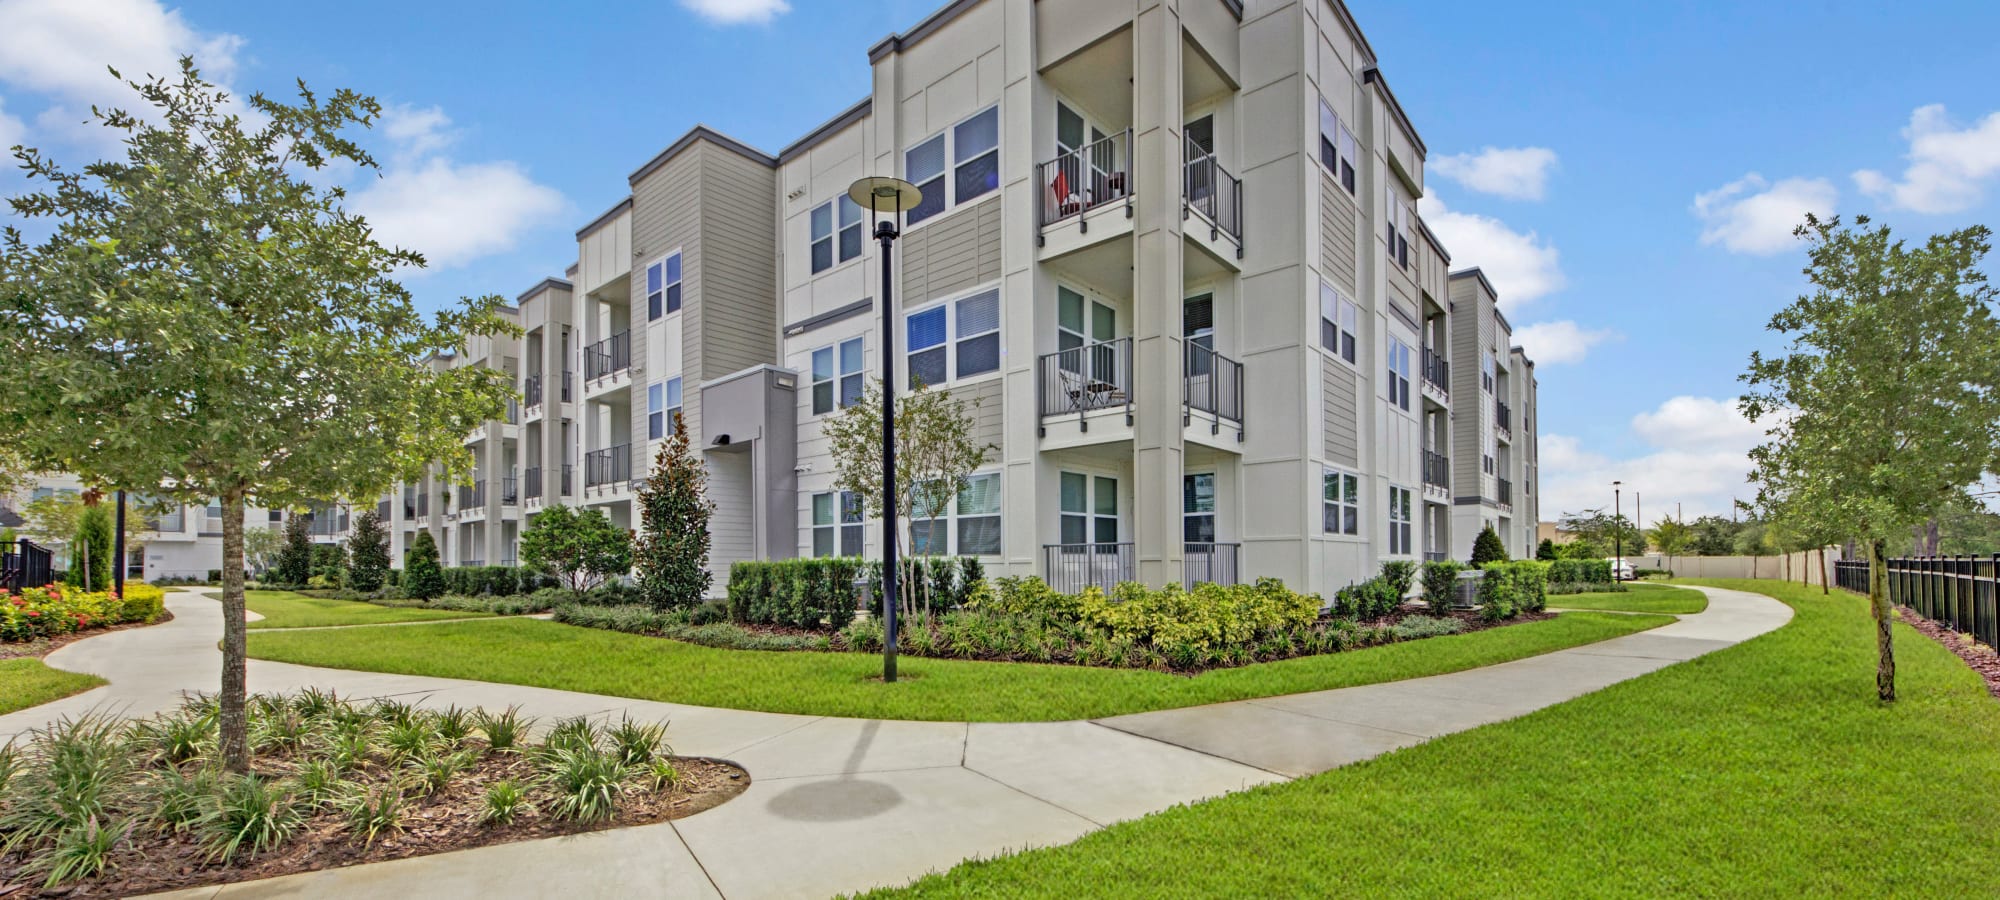  Apartments In Meadow Woods Orlando Fl for Rent